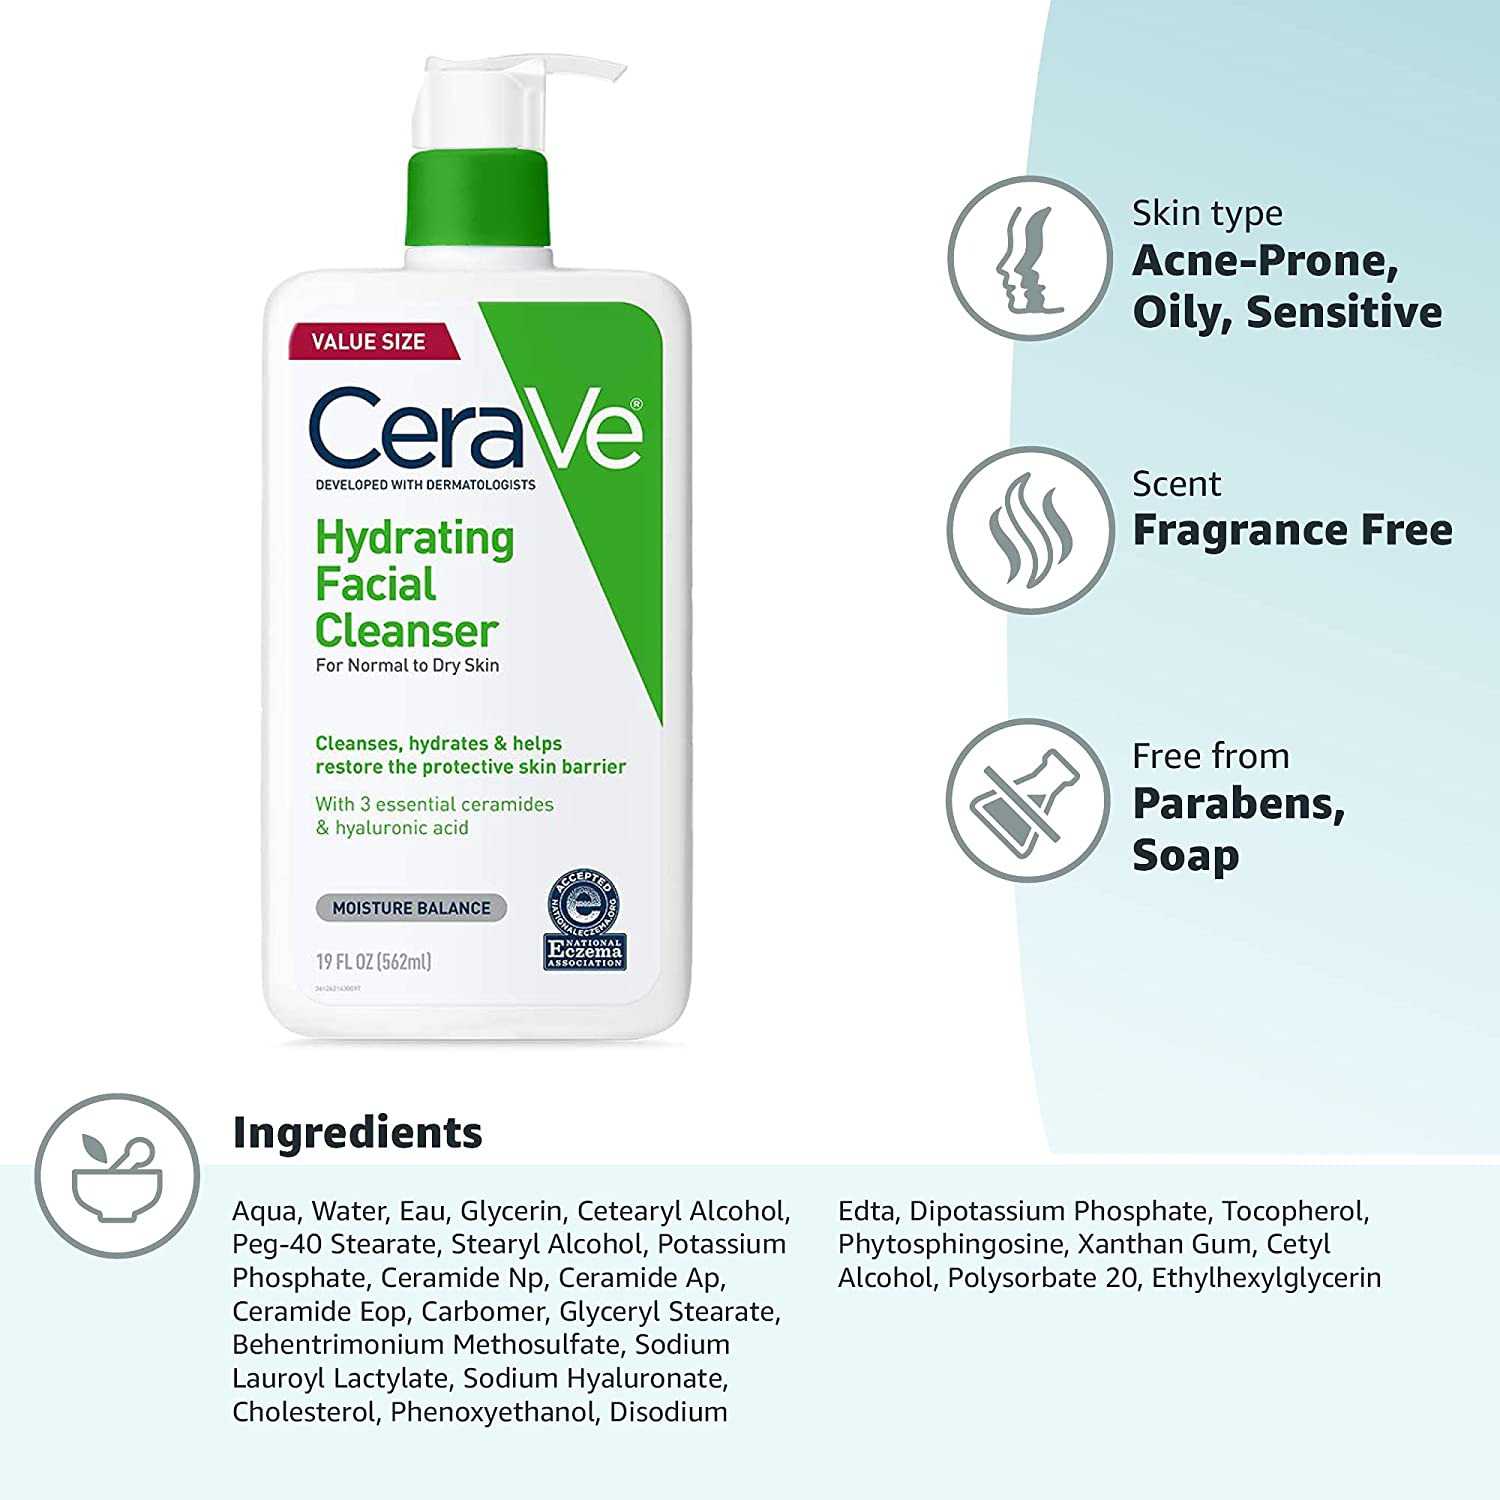 CERAVE Hydrating Cleanser